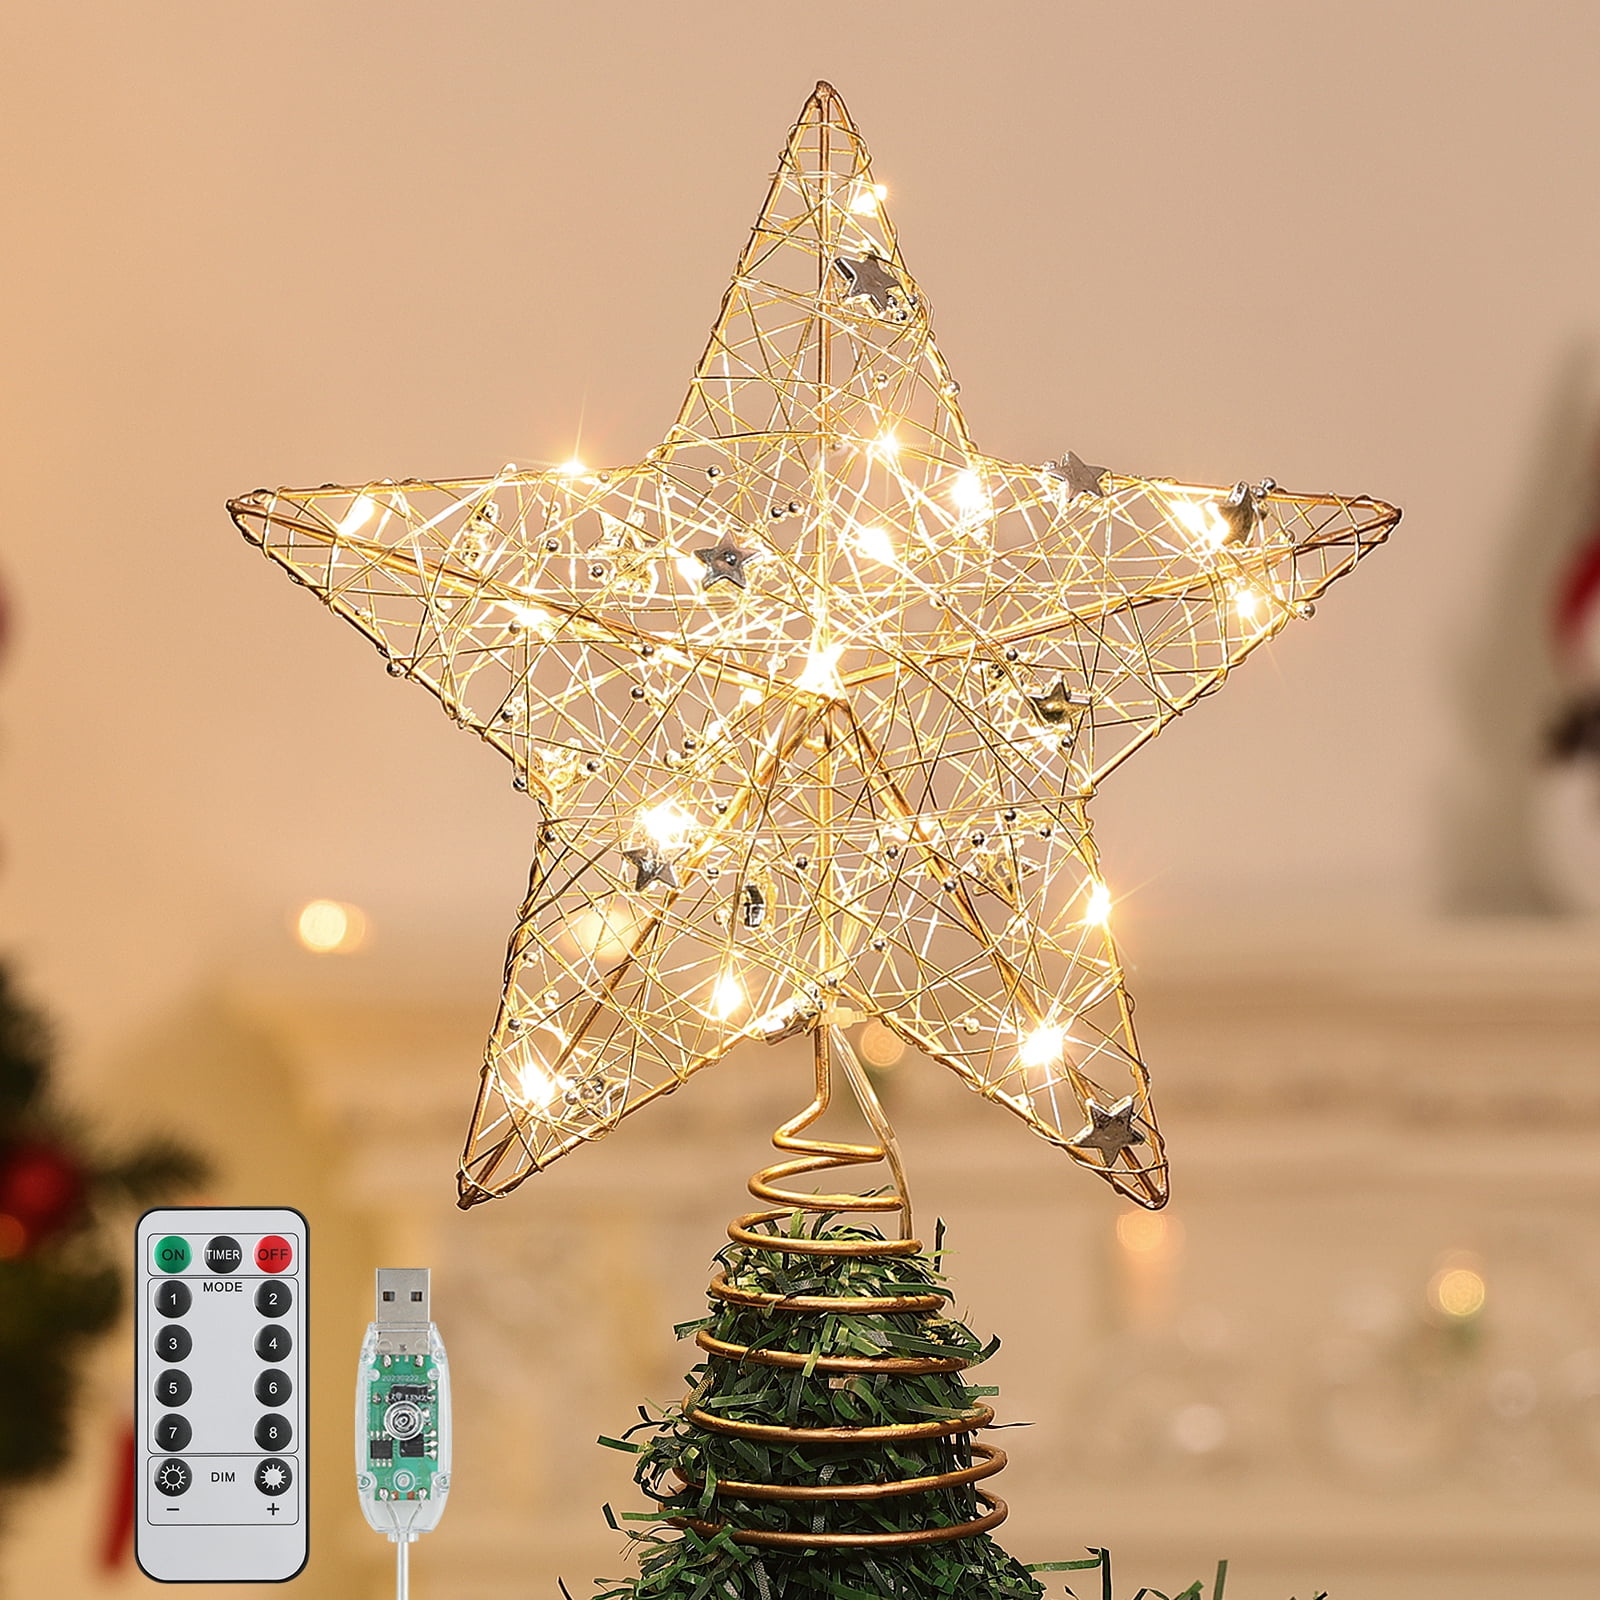 THE REMOTE CONTROLLED HEIGHT ADJUSTABLE CHRISTMAS TREE